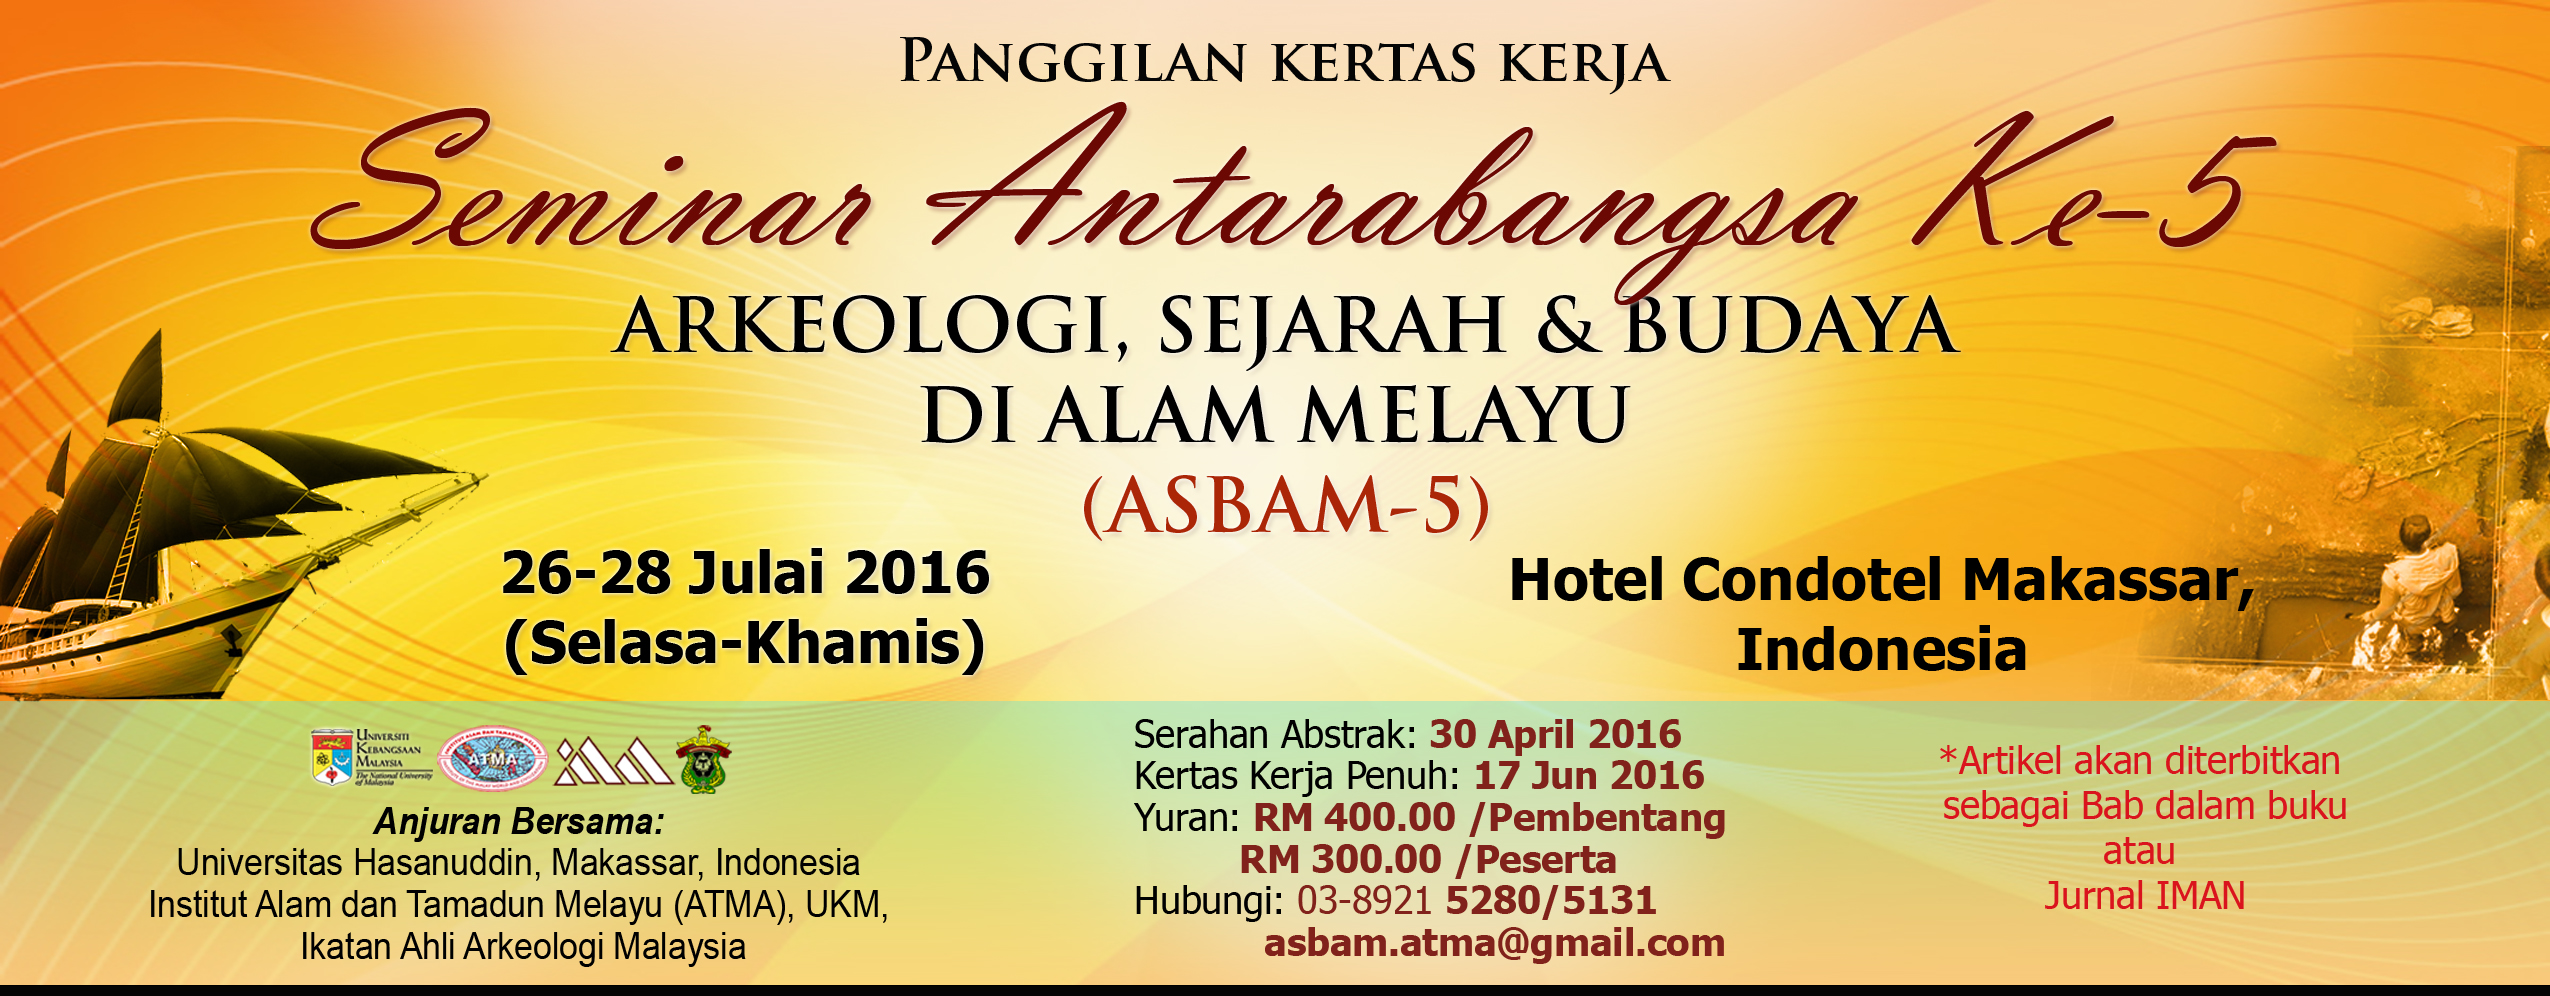  The image is a poster for the 5th International Conference on Archaeology, History, and Culture in the Malay World, which will be held from July 26 to 28, 2016, in Makassar, Indonesia.